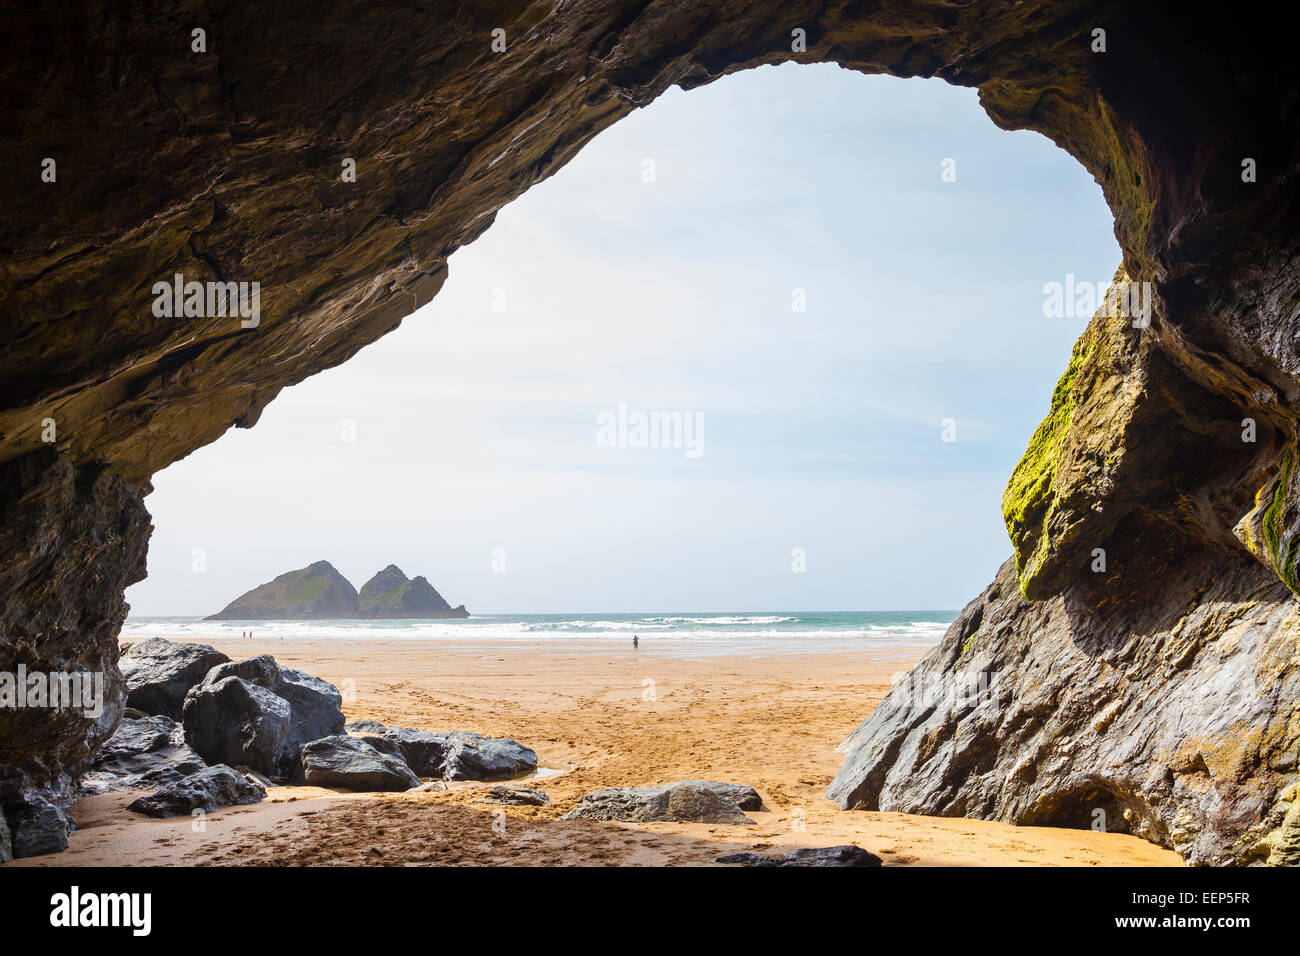 Large cave on the golden sandy beach at Holywell Bay Cornwall England UK Europe Stock Photo